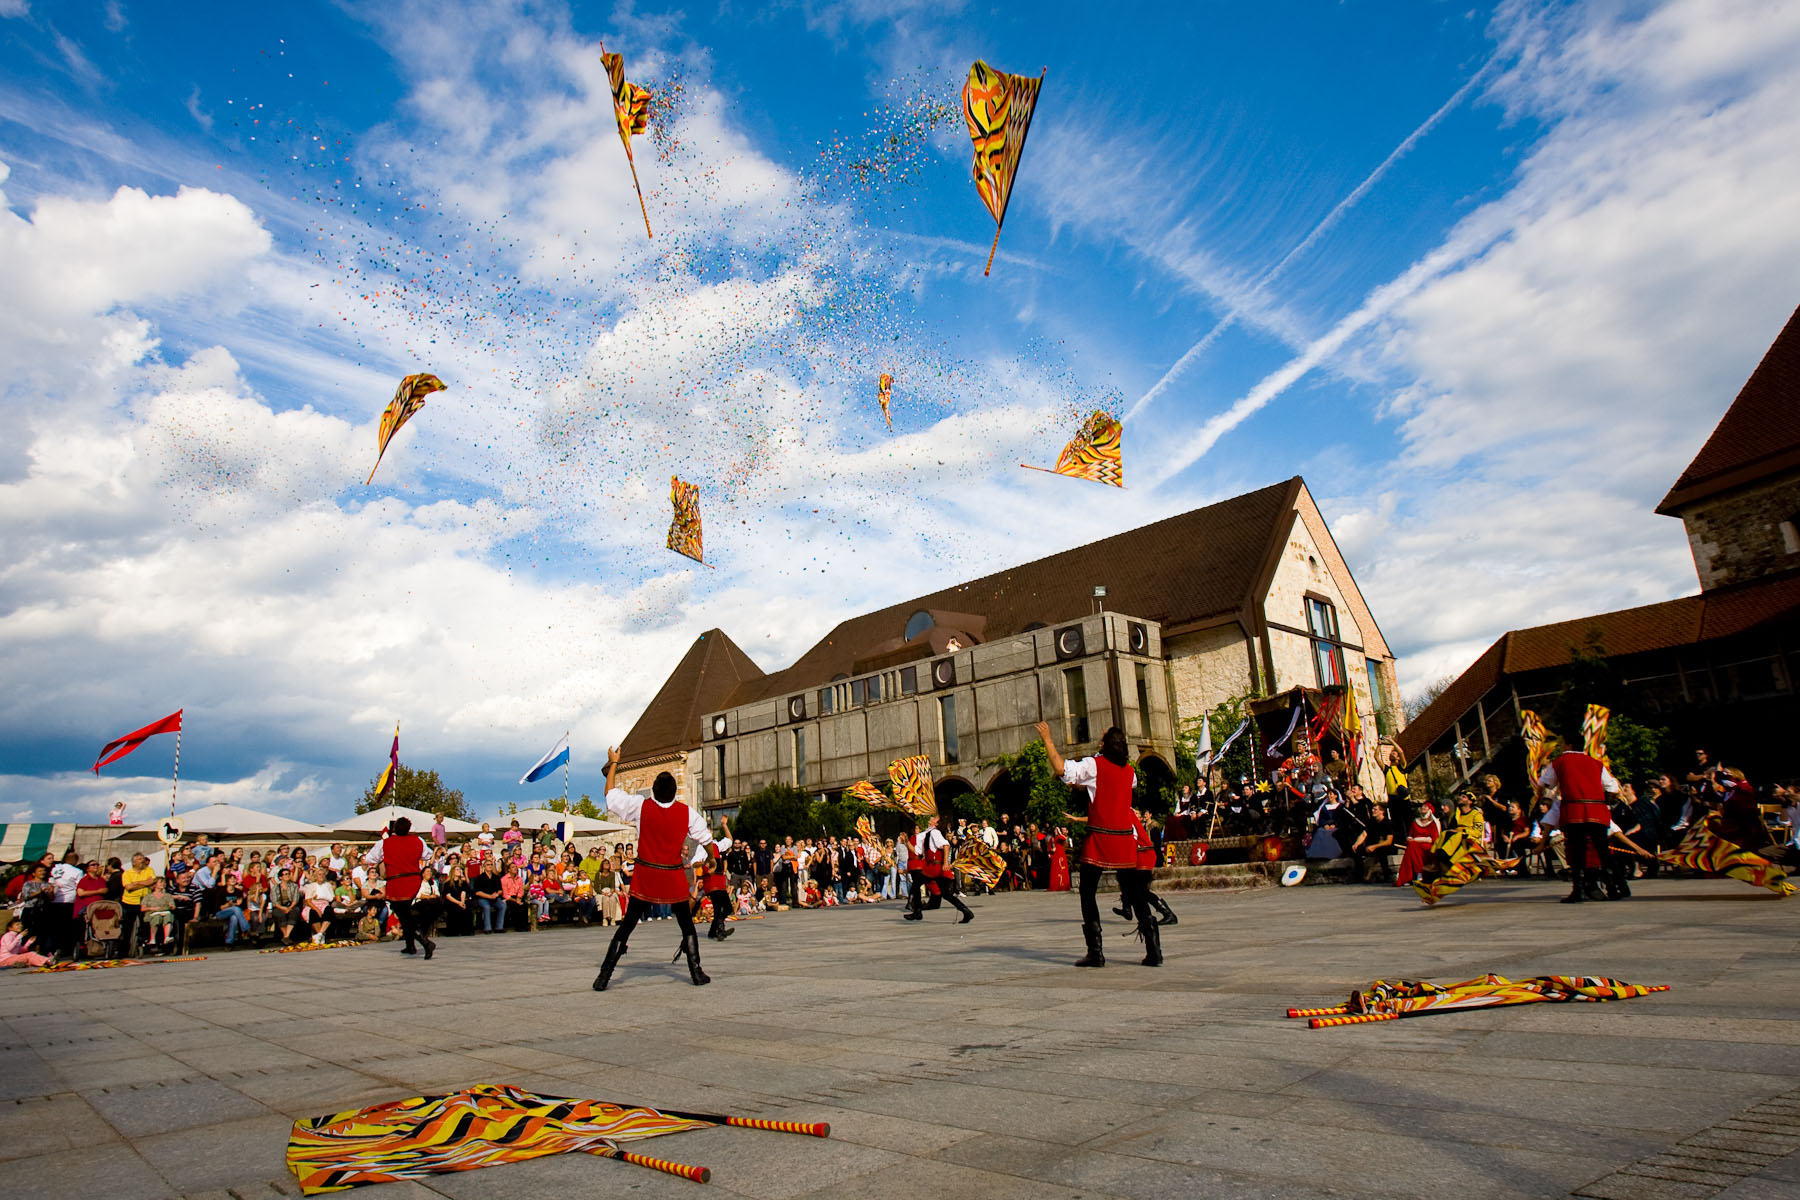 The largest Medieval events like the Ljubljana Medieval Days open with a skillful performance of Italian flag throwers. There can be 50 members of such teams whose performances are an intorduction to a spectacular day.